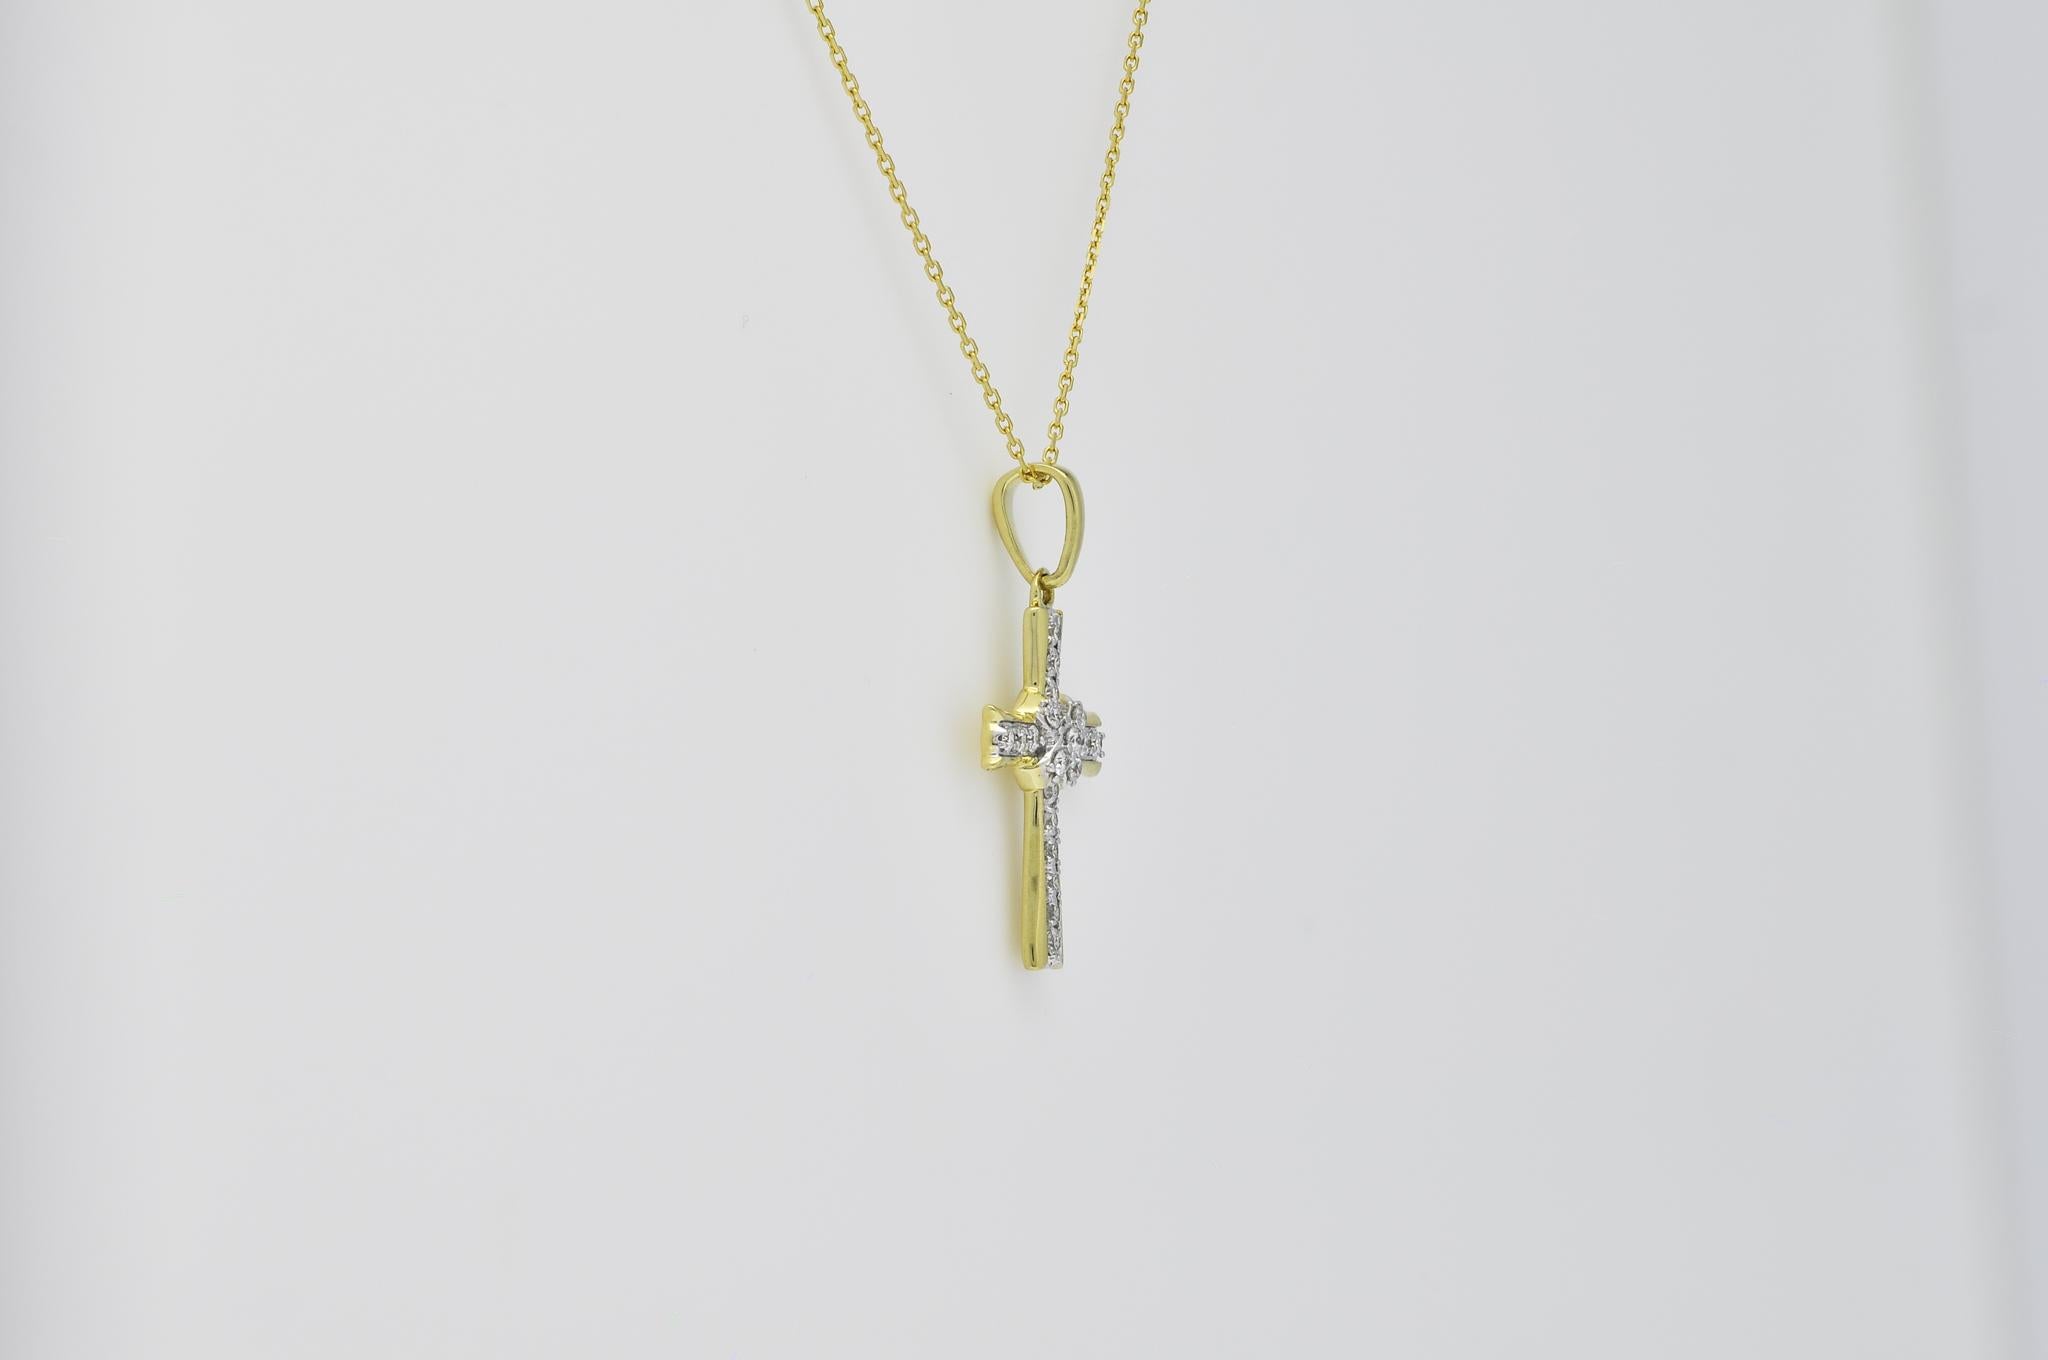 Experience the divine radiance of our exquisite Cross Pendant, a true testament to faith and beauty. Crafted in 18K yellow gold, this pendant embodies the perfect harmony between elegance and spirituality. Adorned with a collection of natural